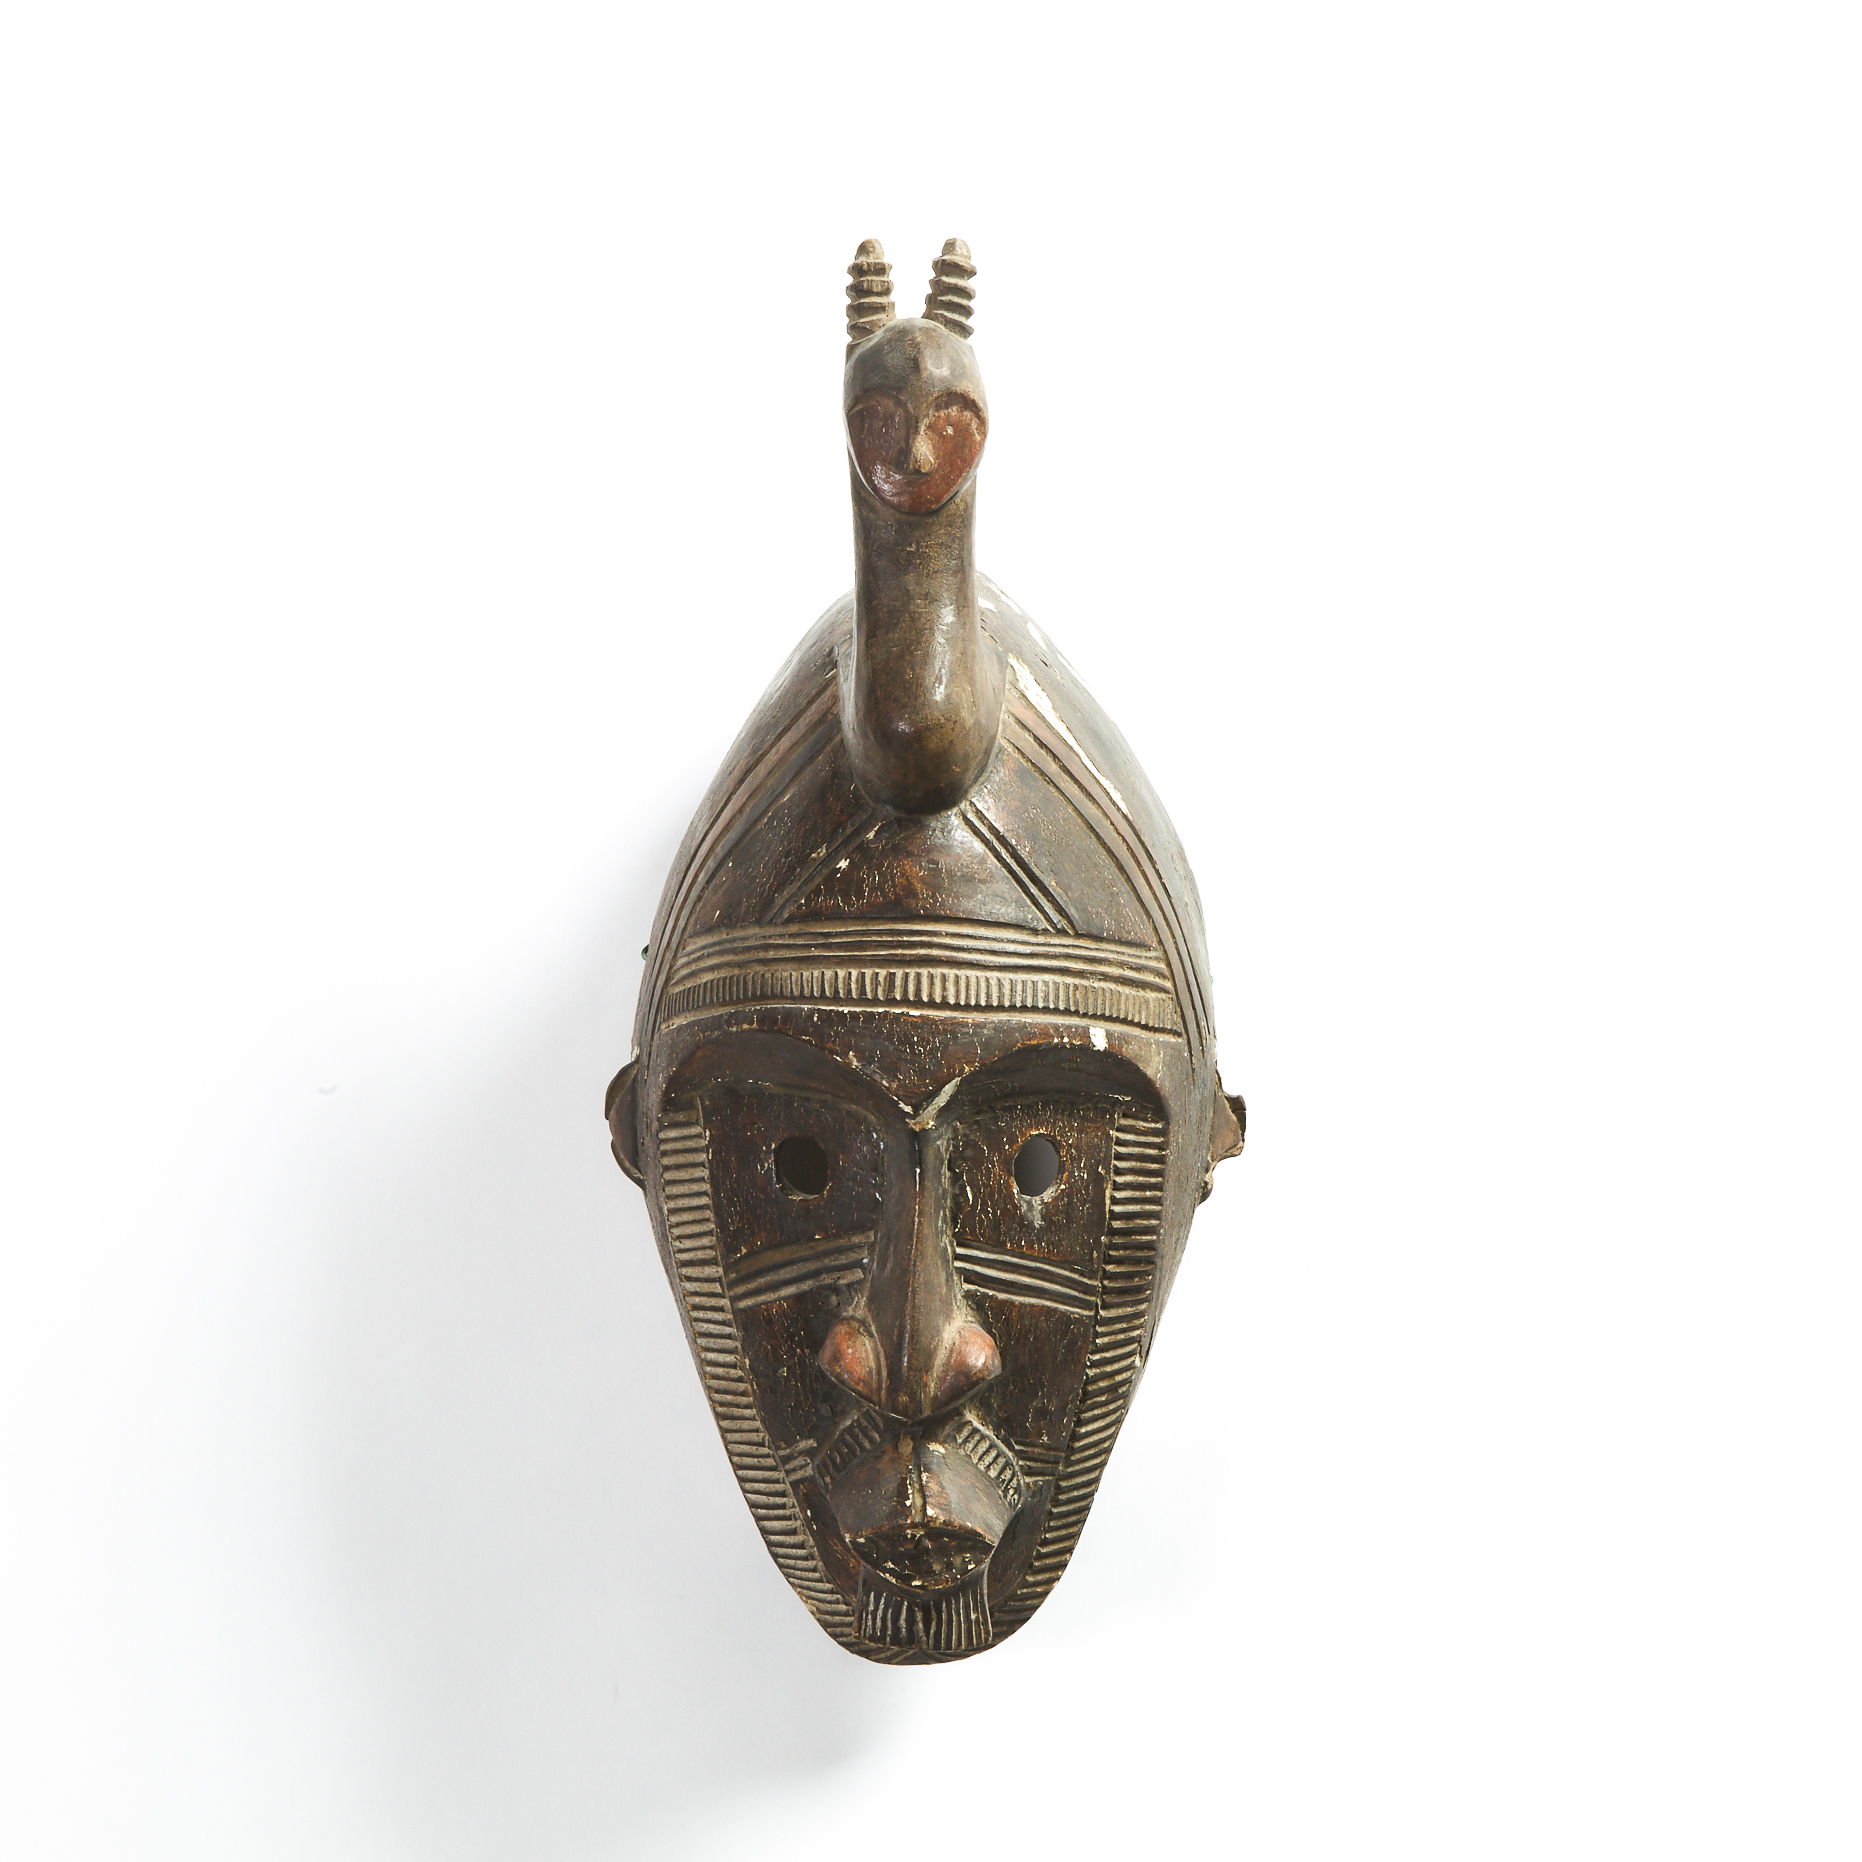 West African Mask, possibly Yaure, mid to late 20th century